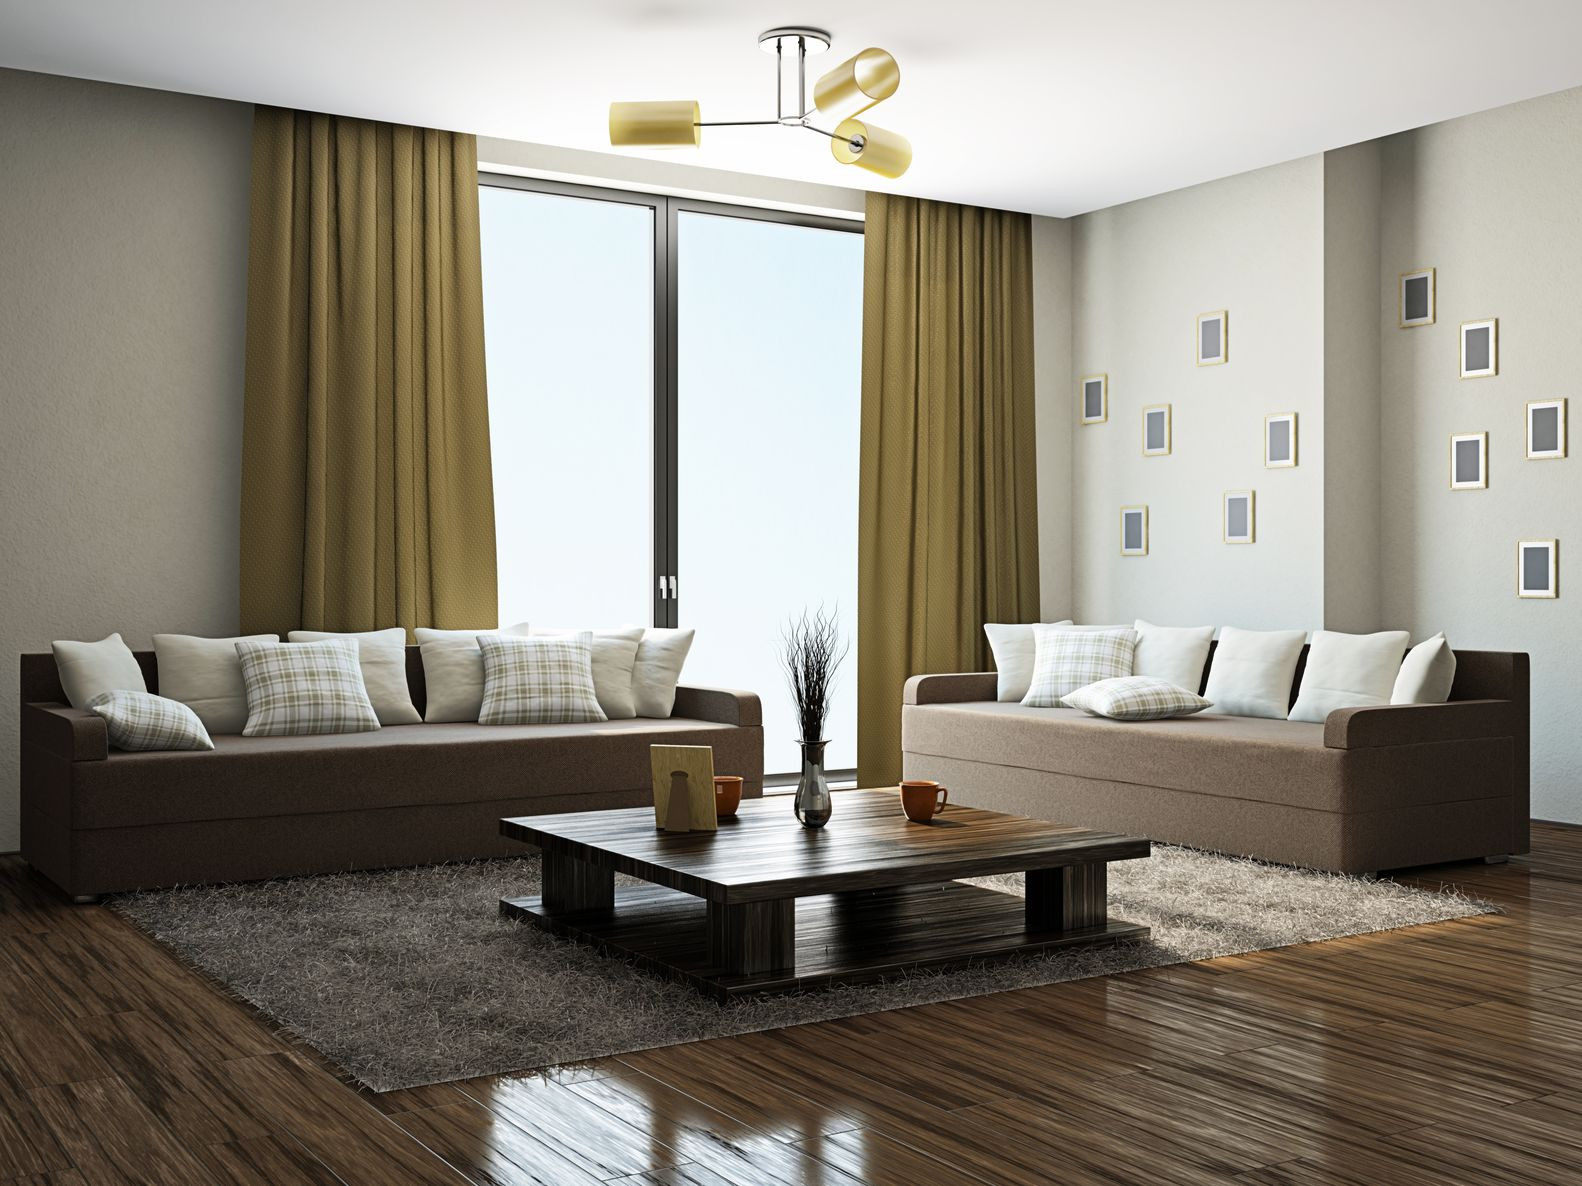 Curtains Styles For Living Room
 Awesome Living Room Curtains Designs Amaza Design